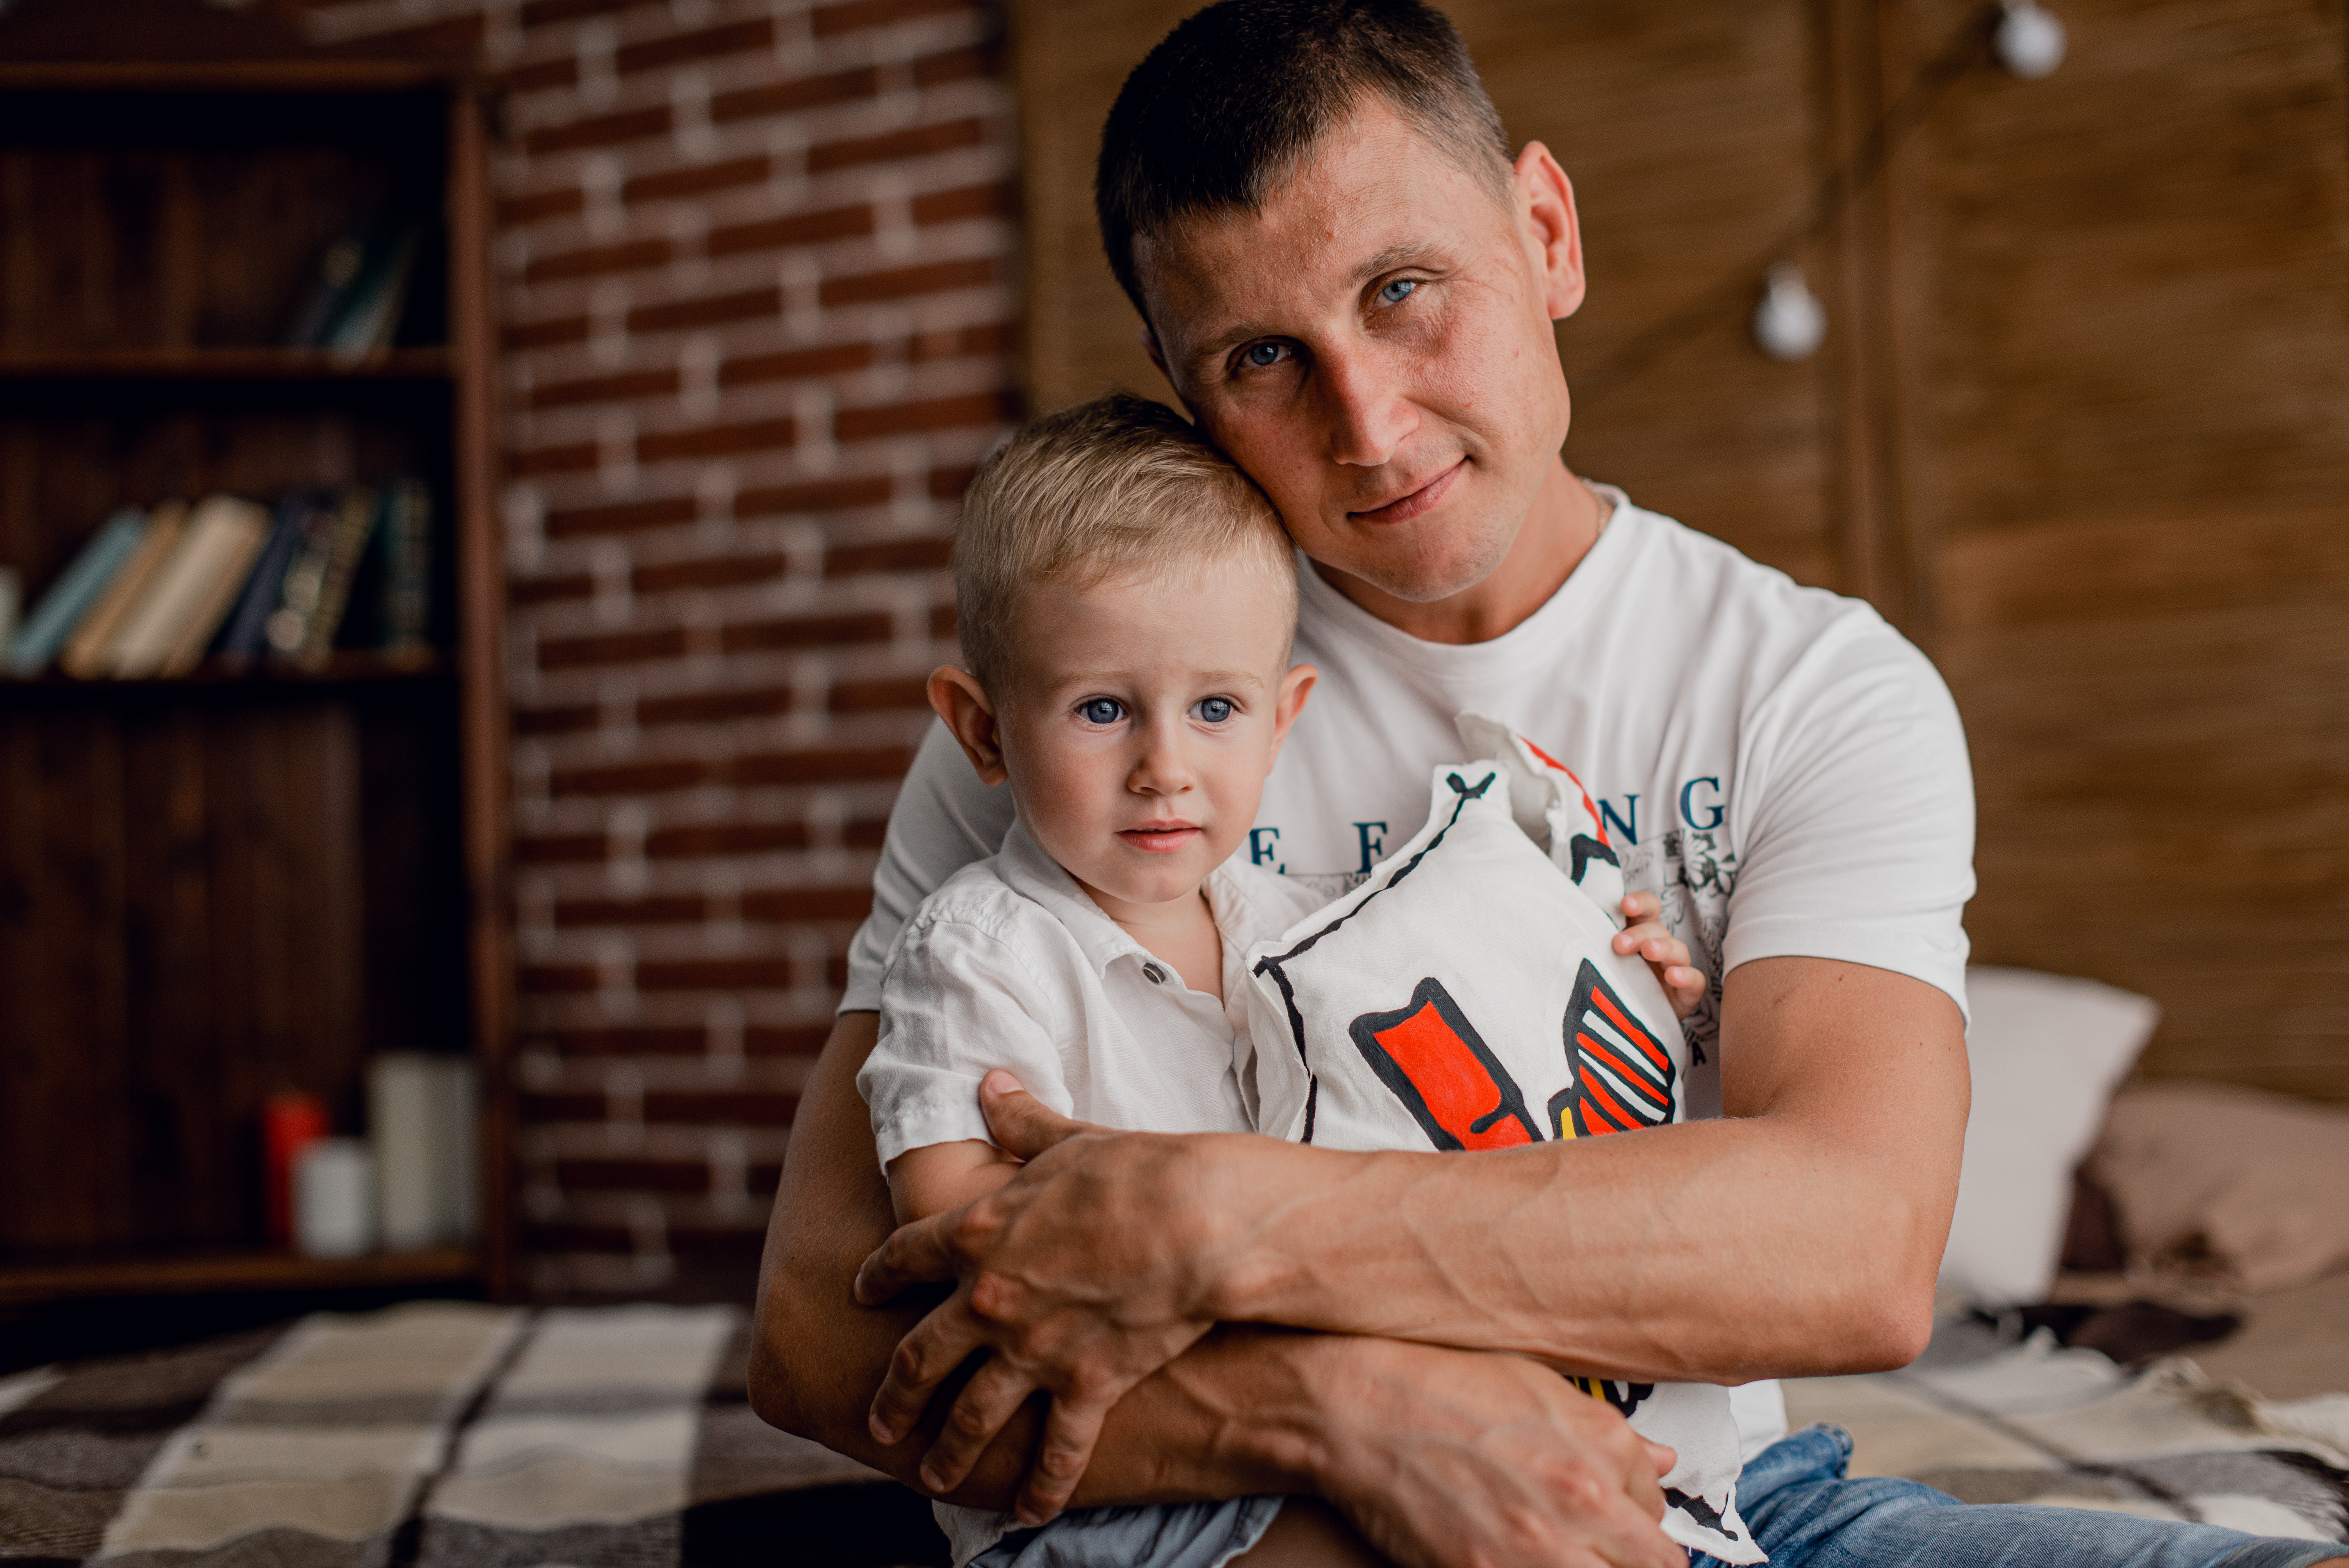 Family that utilized RMHC Ukraine while their child received medical treatment.